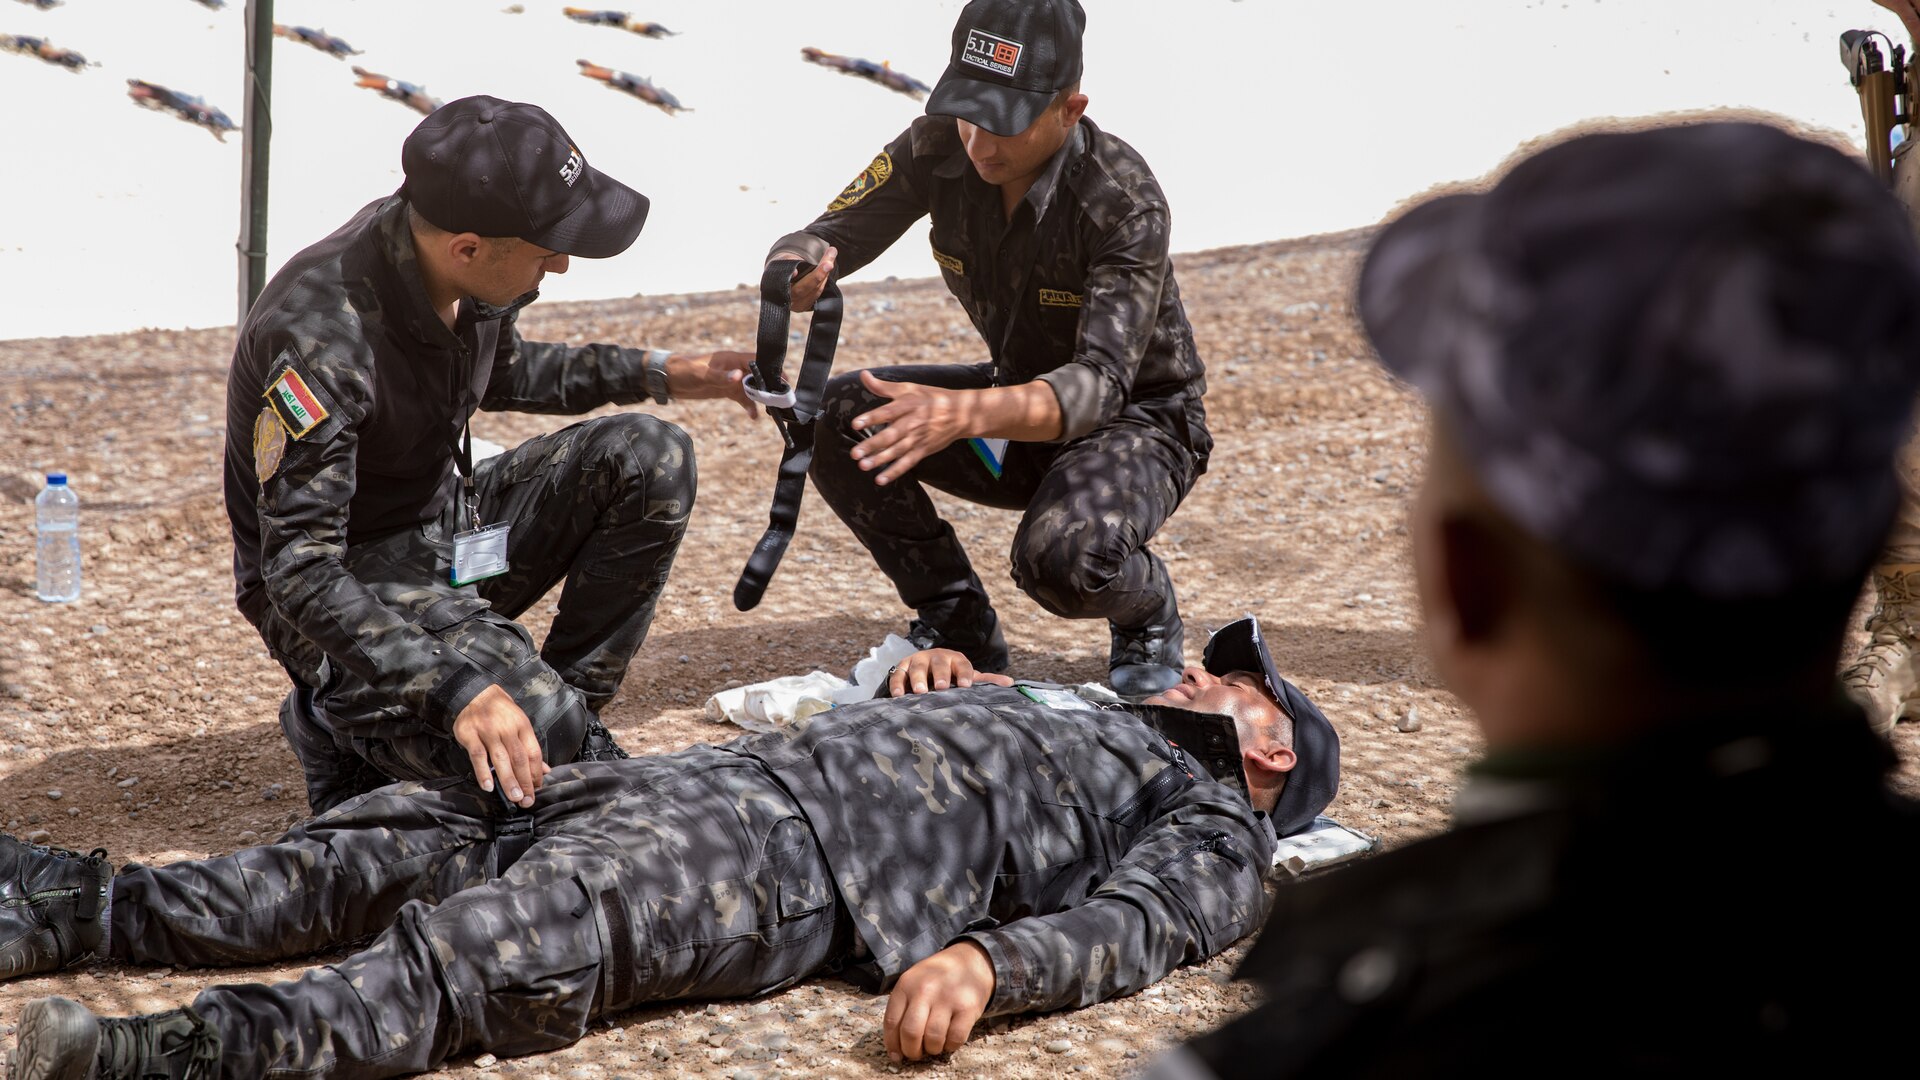 Iraqi provincial police members assigned to the 4th Ninawa Emergency Response Battalion prepare a tourniquet during a combat first aid class on Qayyarah West Airfield, Iraq, May 19, 2019. Iraqi students go through a four-week Wide Area Security Forces class taught by Canadian soldiers to learn essential combat skills like first aid, tactical movement, urban operations, and detainee procedures to enhance the Iraqi Security Forces’ combat skills and self-sufficiency. Coalition Forces are in Iraq at the invitation of the Government of Iraq to train and advise in support of the enduring mission to defeat Daesh. (Portions of this image were altered for operational security) (U.S. Army Reserve photo by Spc. DeAndre Pierce)